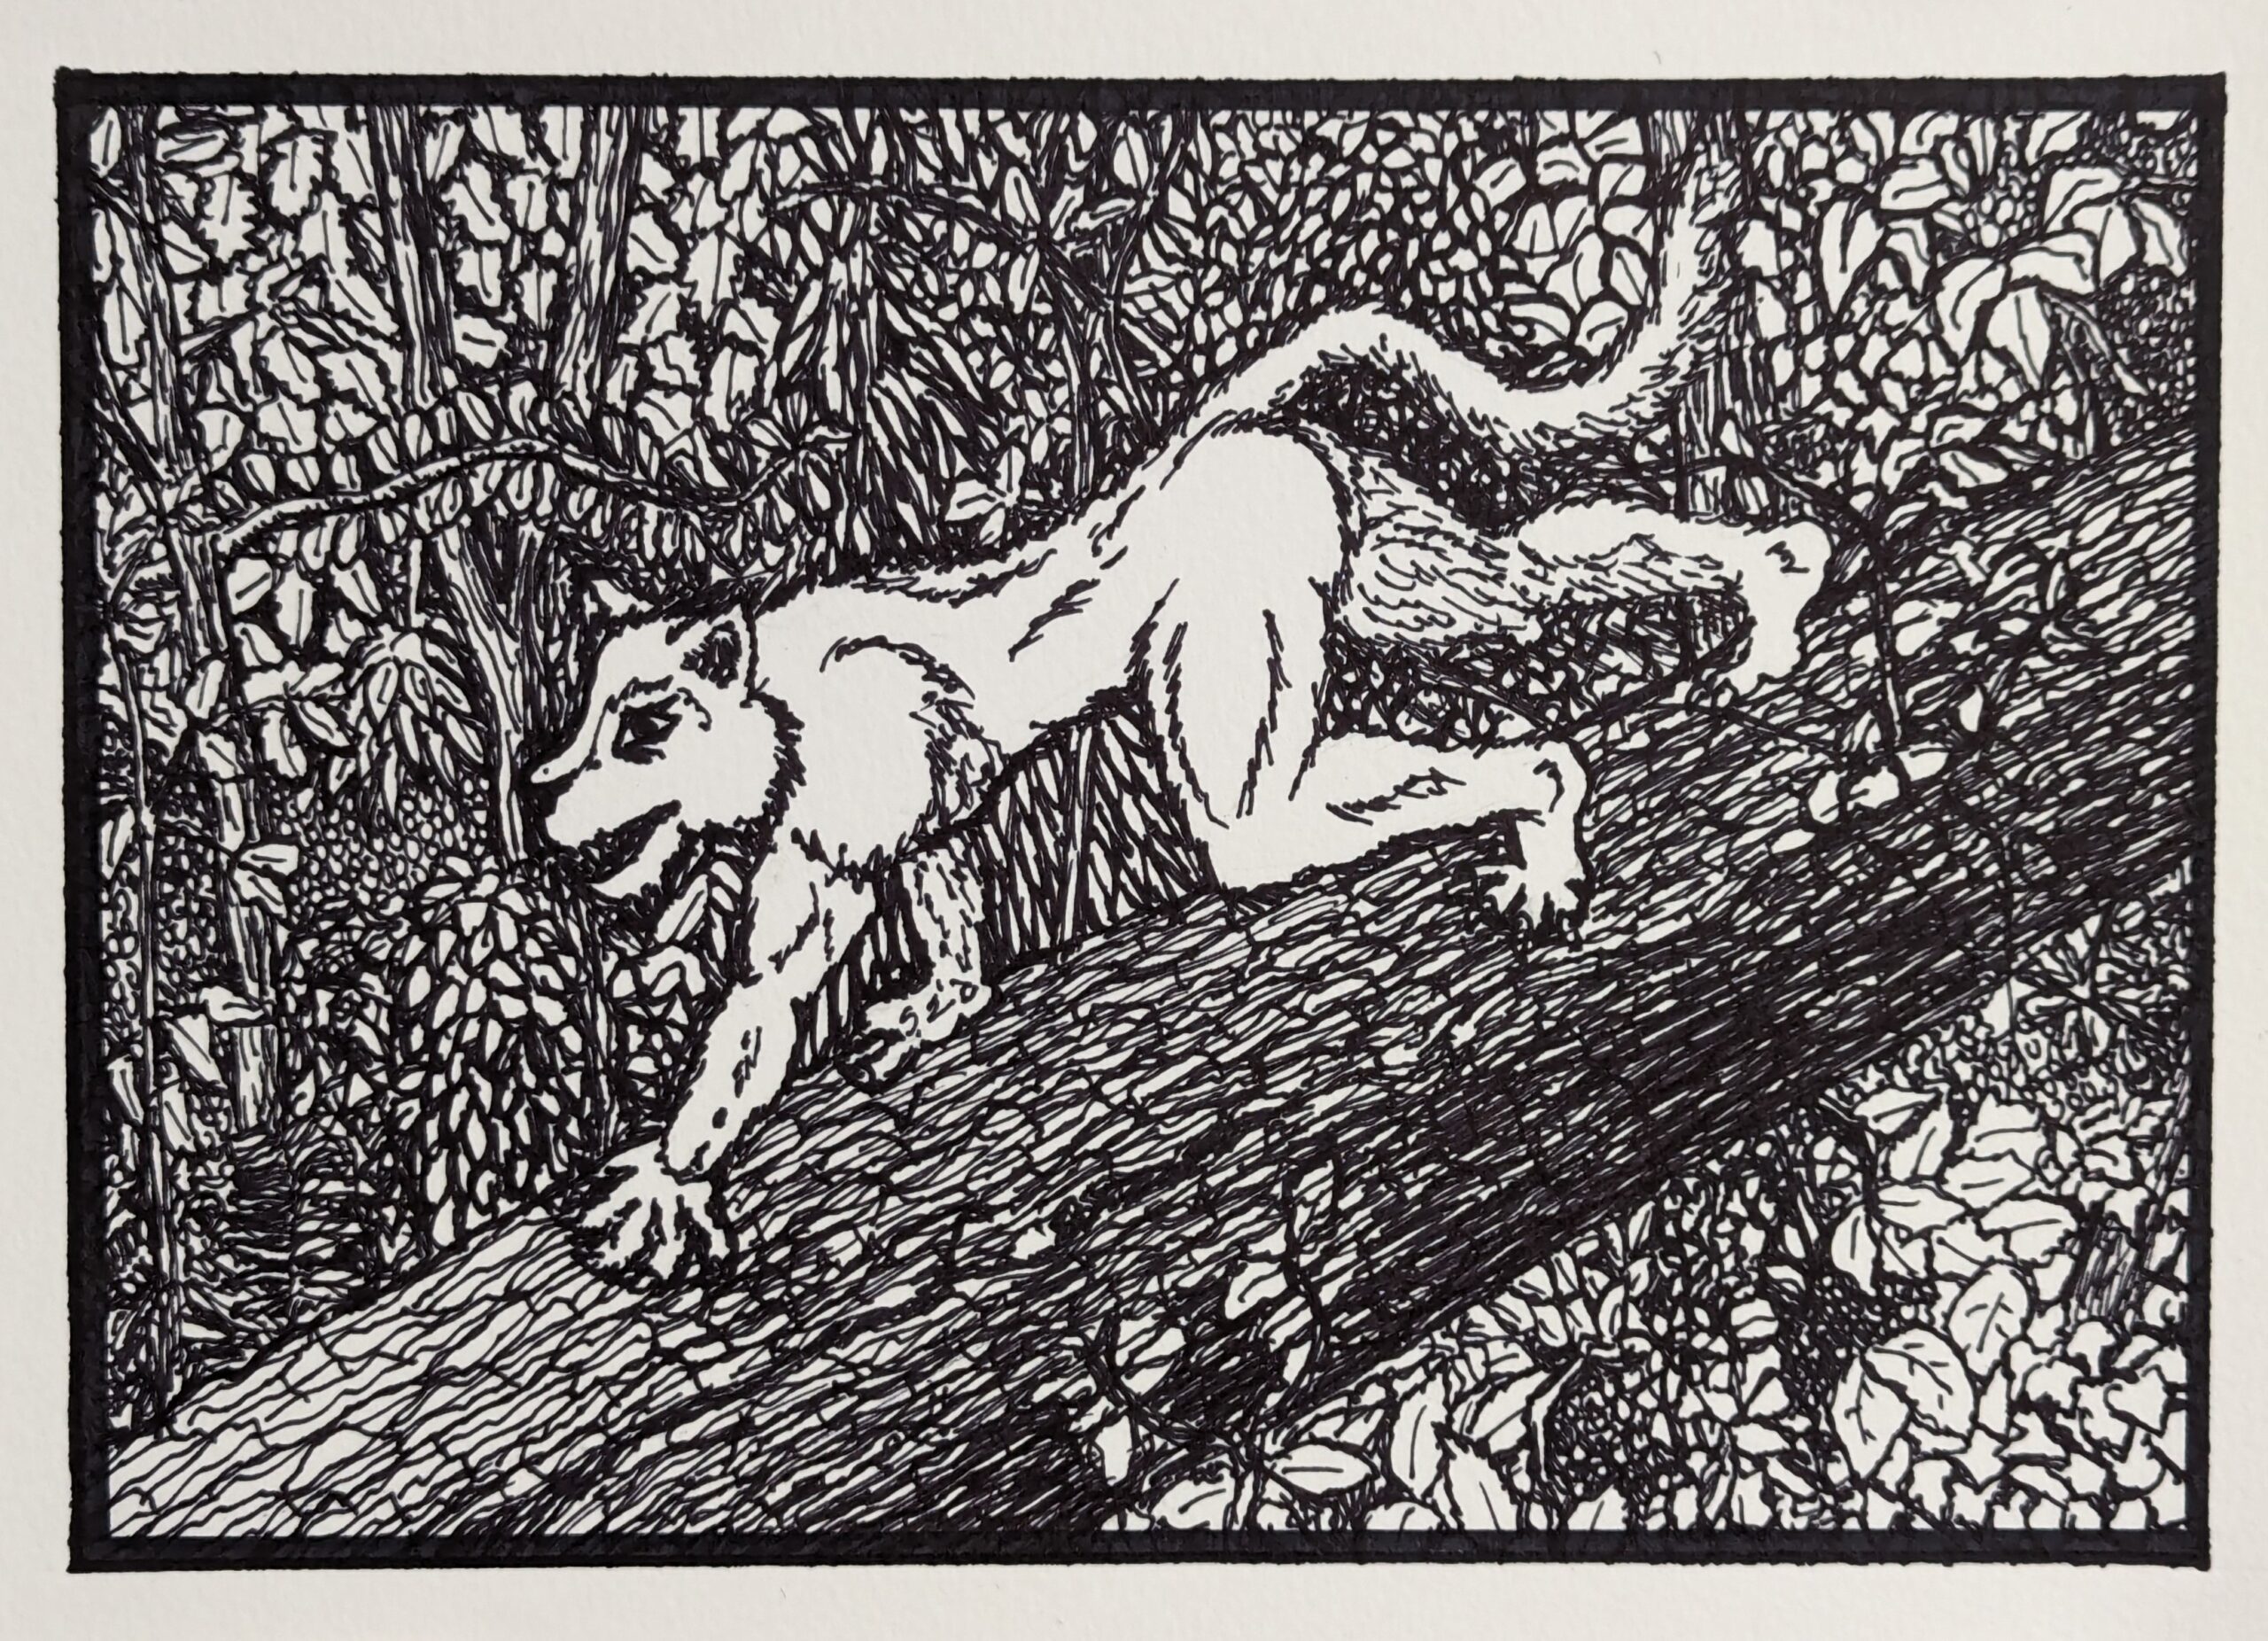 Alabama White Thang crawling across a felled tree. Artist rendering in pen and ink